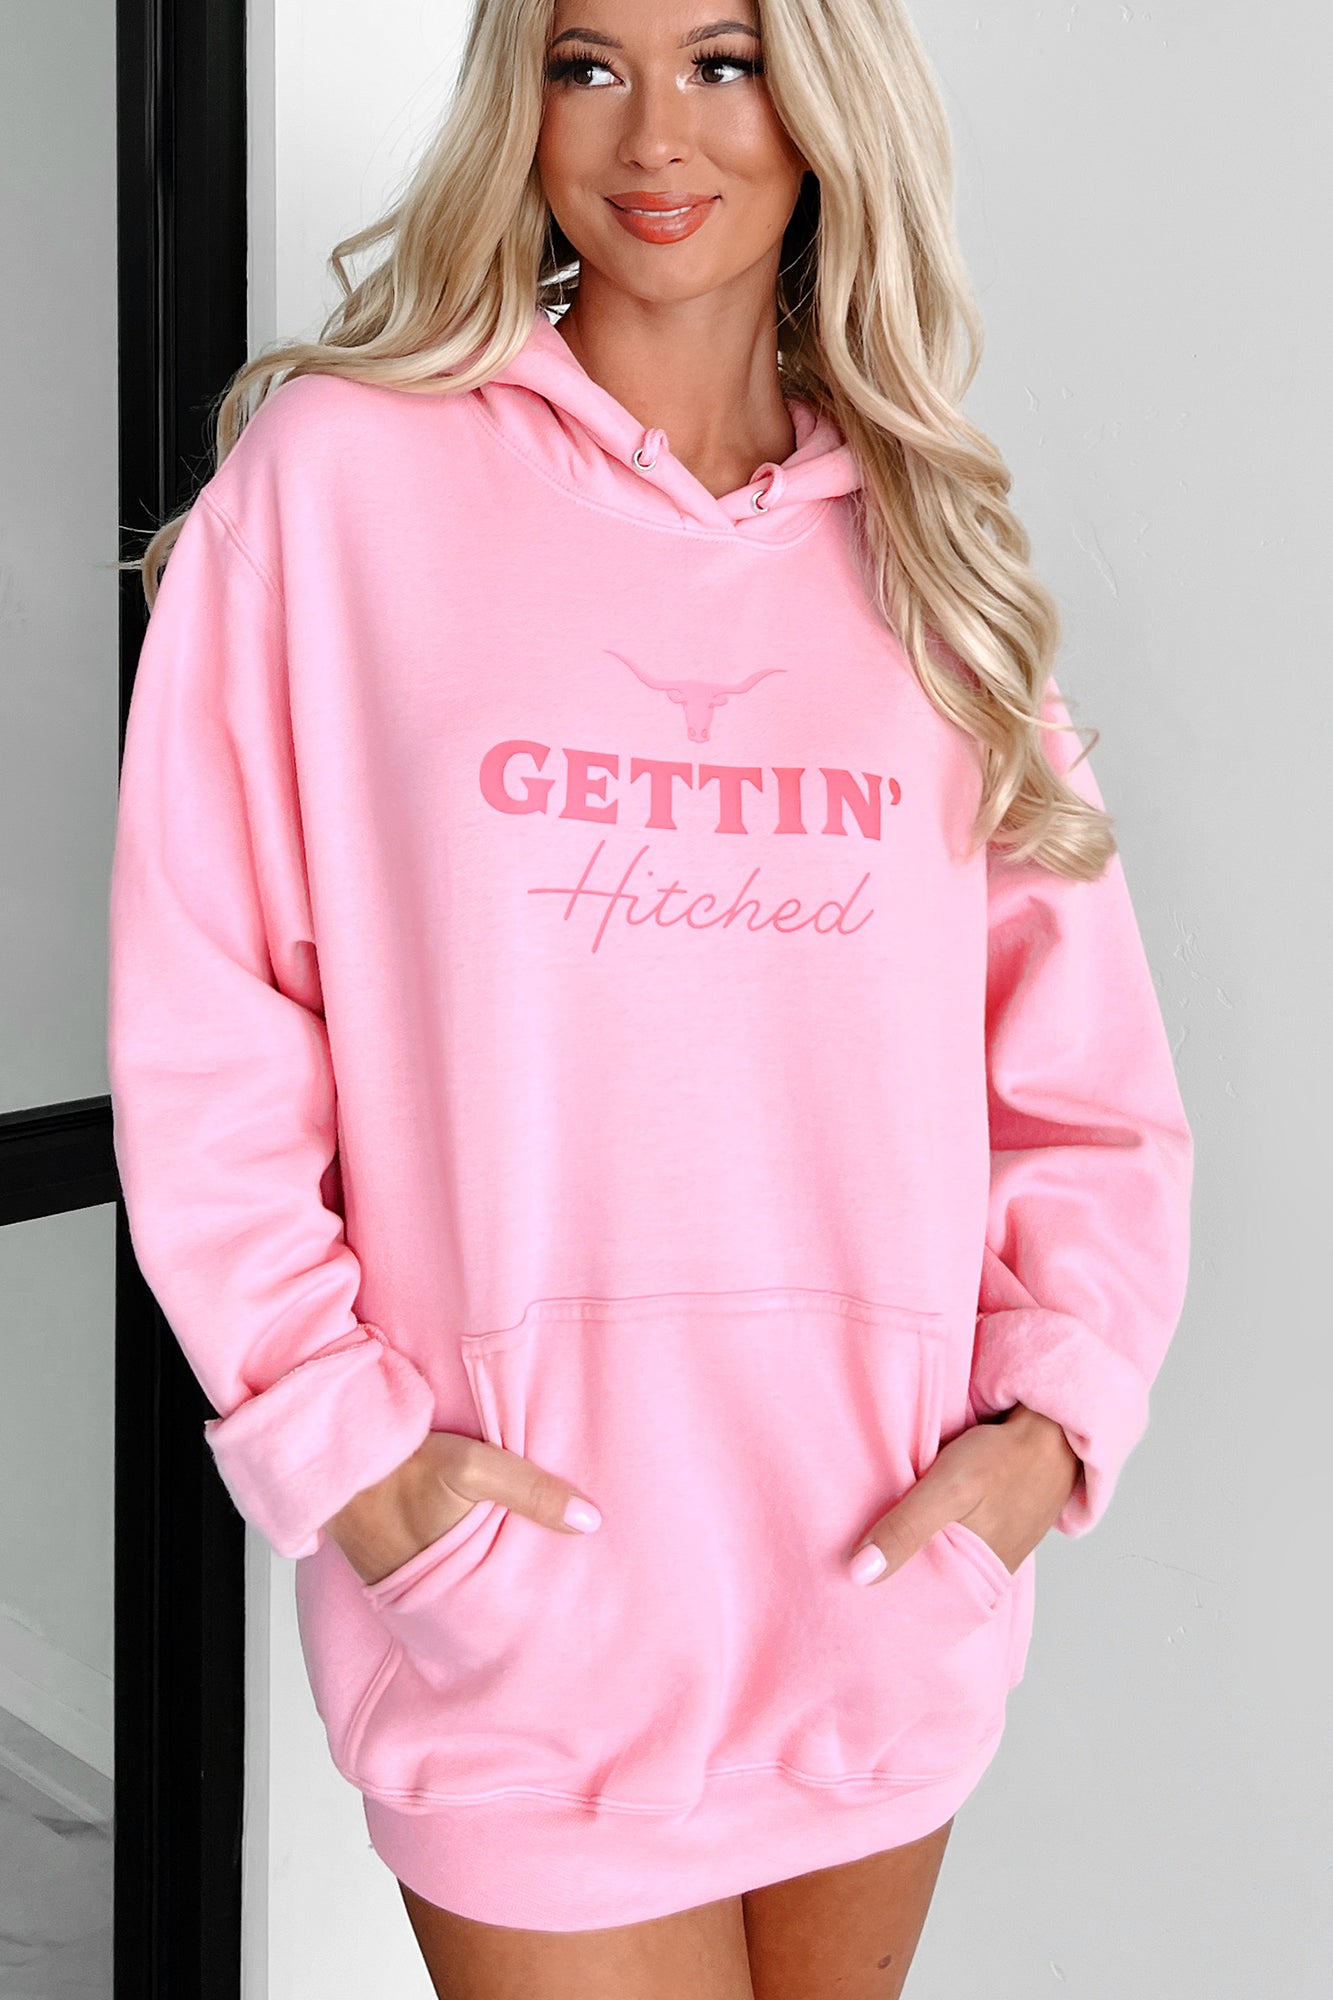 "Gettin' Hitched" Graphic Hoodie (Candy Pink) - Print On Demand - NanaMacs